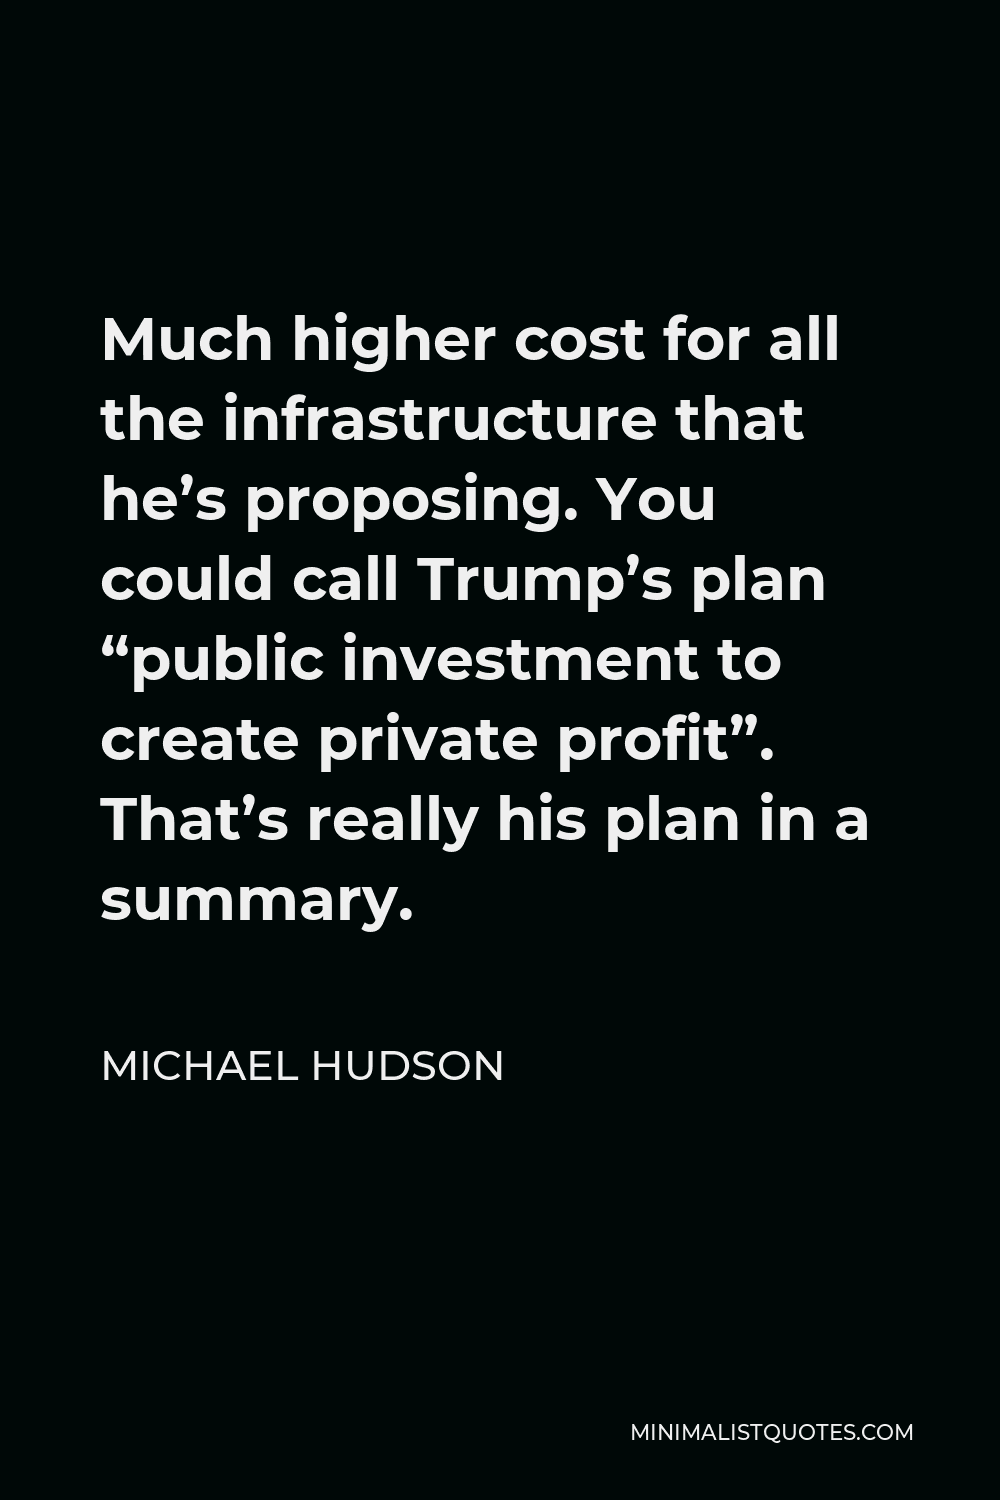 Michael Hudson Quote - Much higher cost for all the infrastructure that he’s proposing. You could call Trump’s plan “public investment to create private profit”. That’s really his plan in a summary.